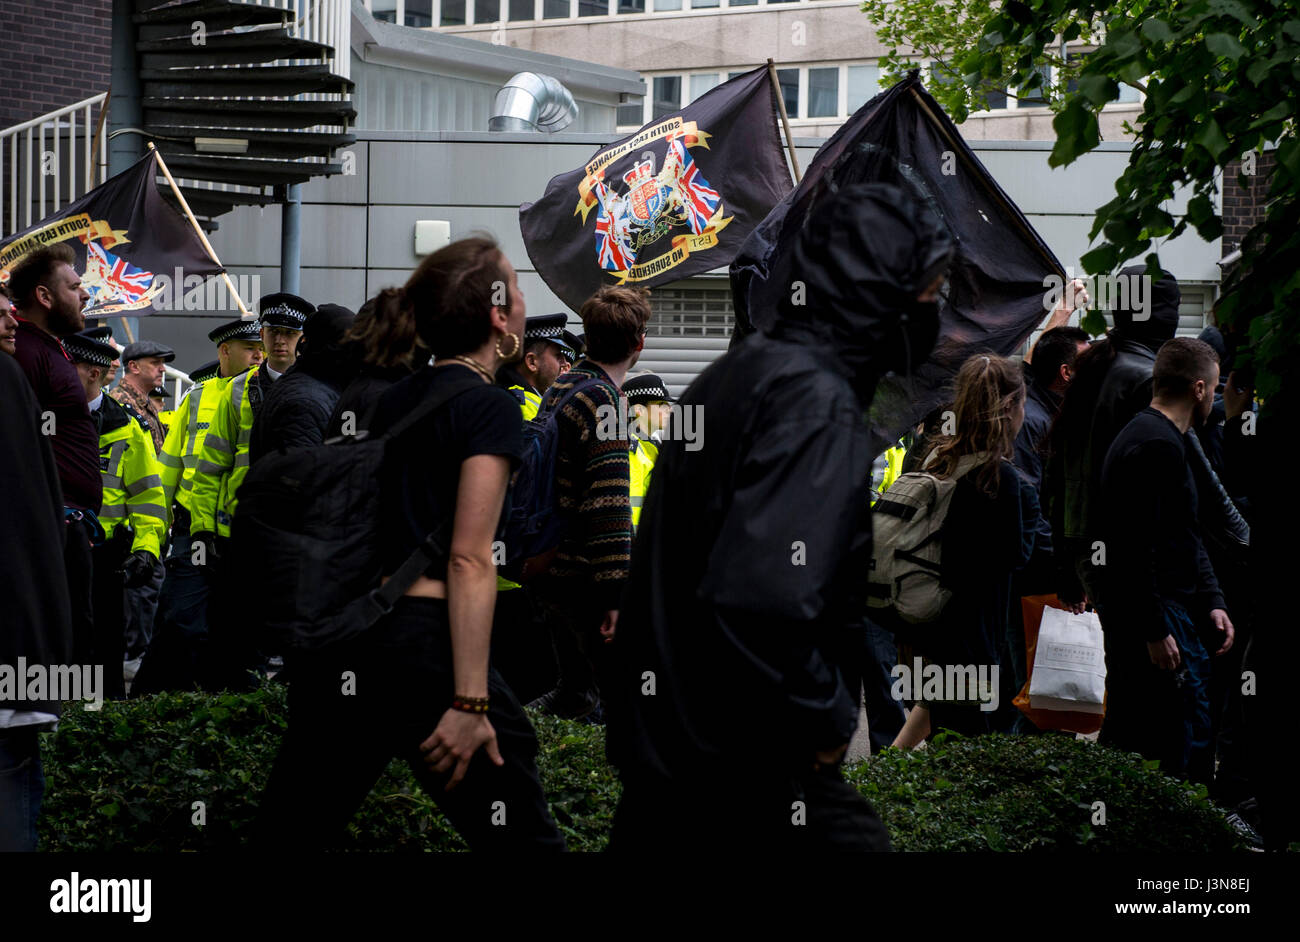 Police monitor two groups of protesters demonstrating for and against immigration outside Lunar House in Croydon, the headquarters of the Home Office's UK Visas and Immigration division. Stock Photo